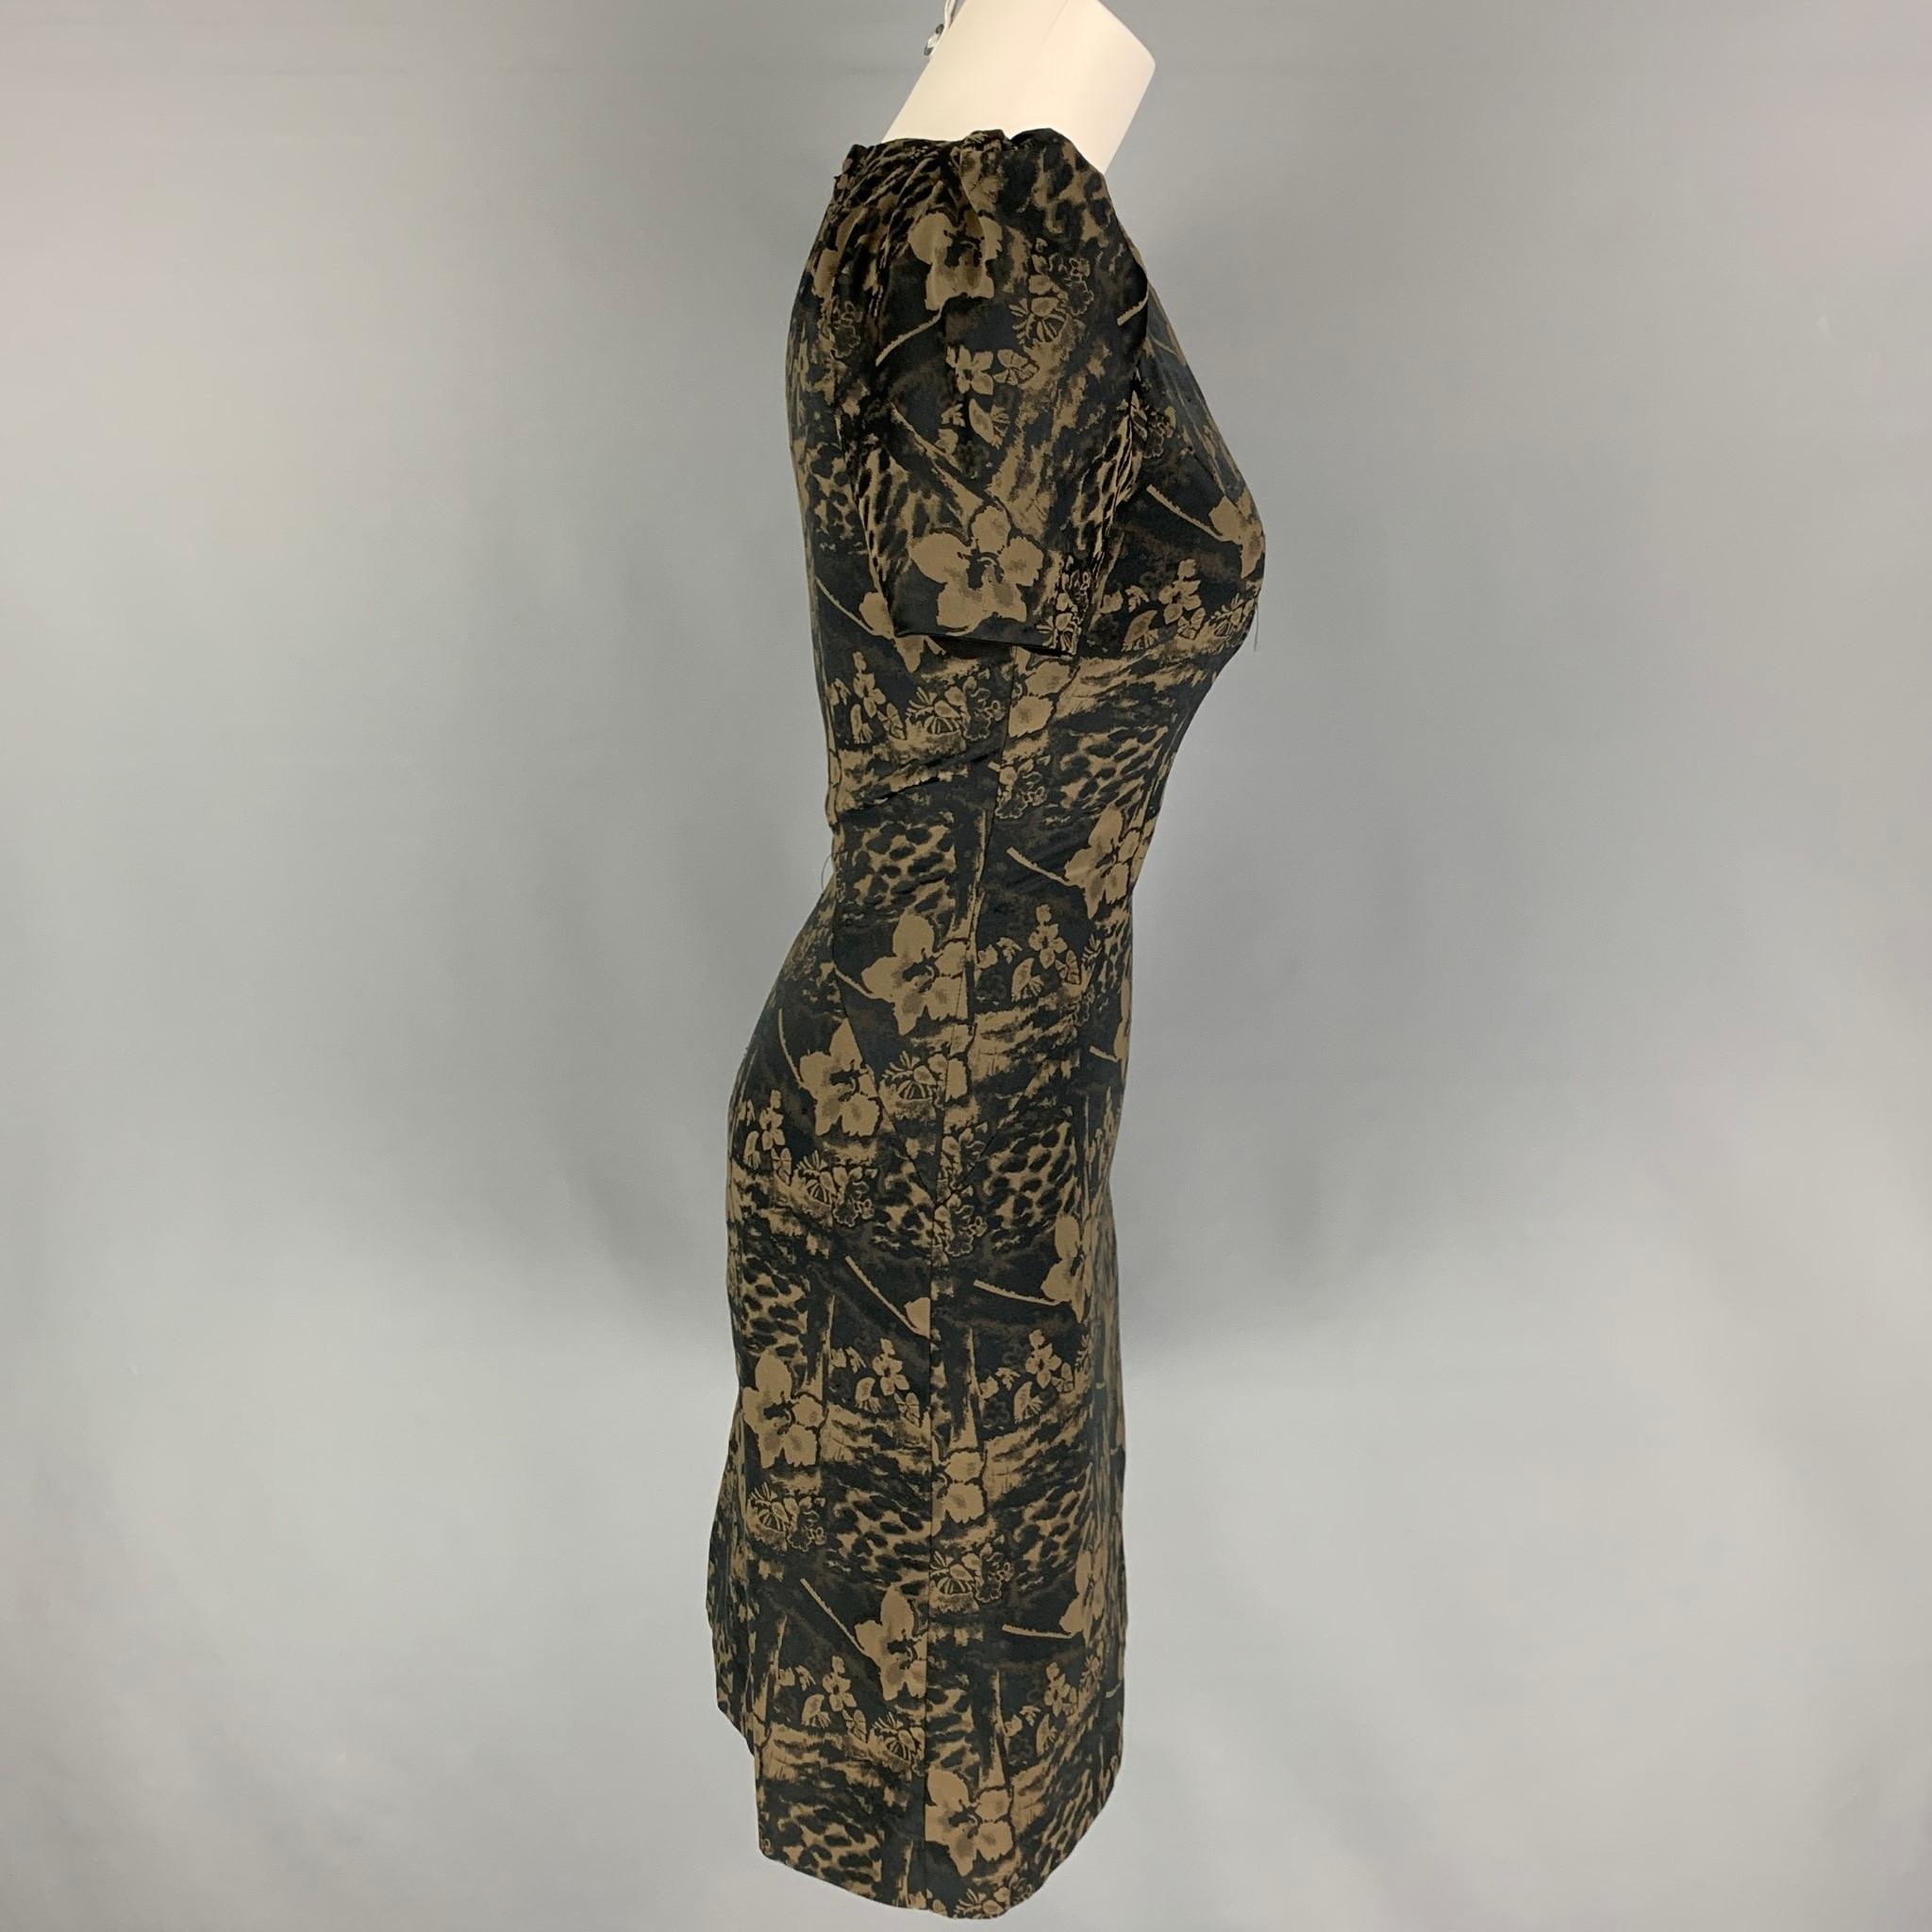 ZAC POSEN dress comes in a olive & black floral material featuring ruched sleeves and back zip up closure. 

Very Good Pre-Owned Condition.
Marked: Size tag removed.

Measurements:

Shoulder: 15 in.
Bust: 31 in.
Waist: 26 in.
Hip: 33 in.
Sleeve: 6